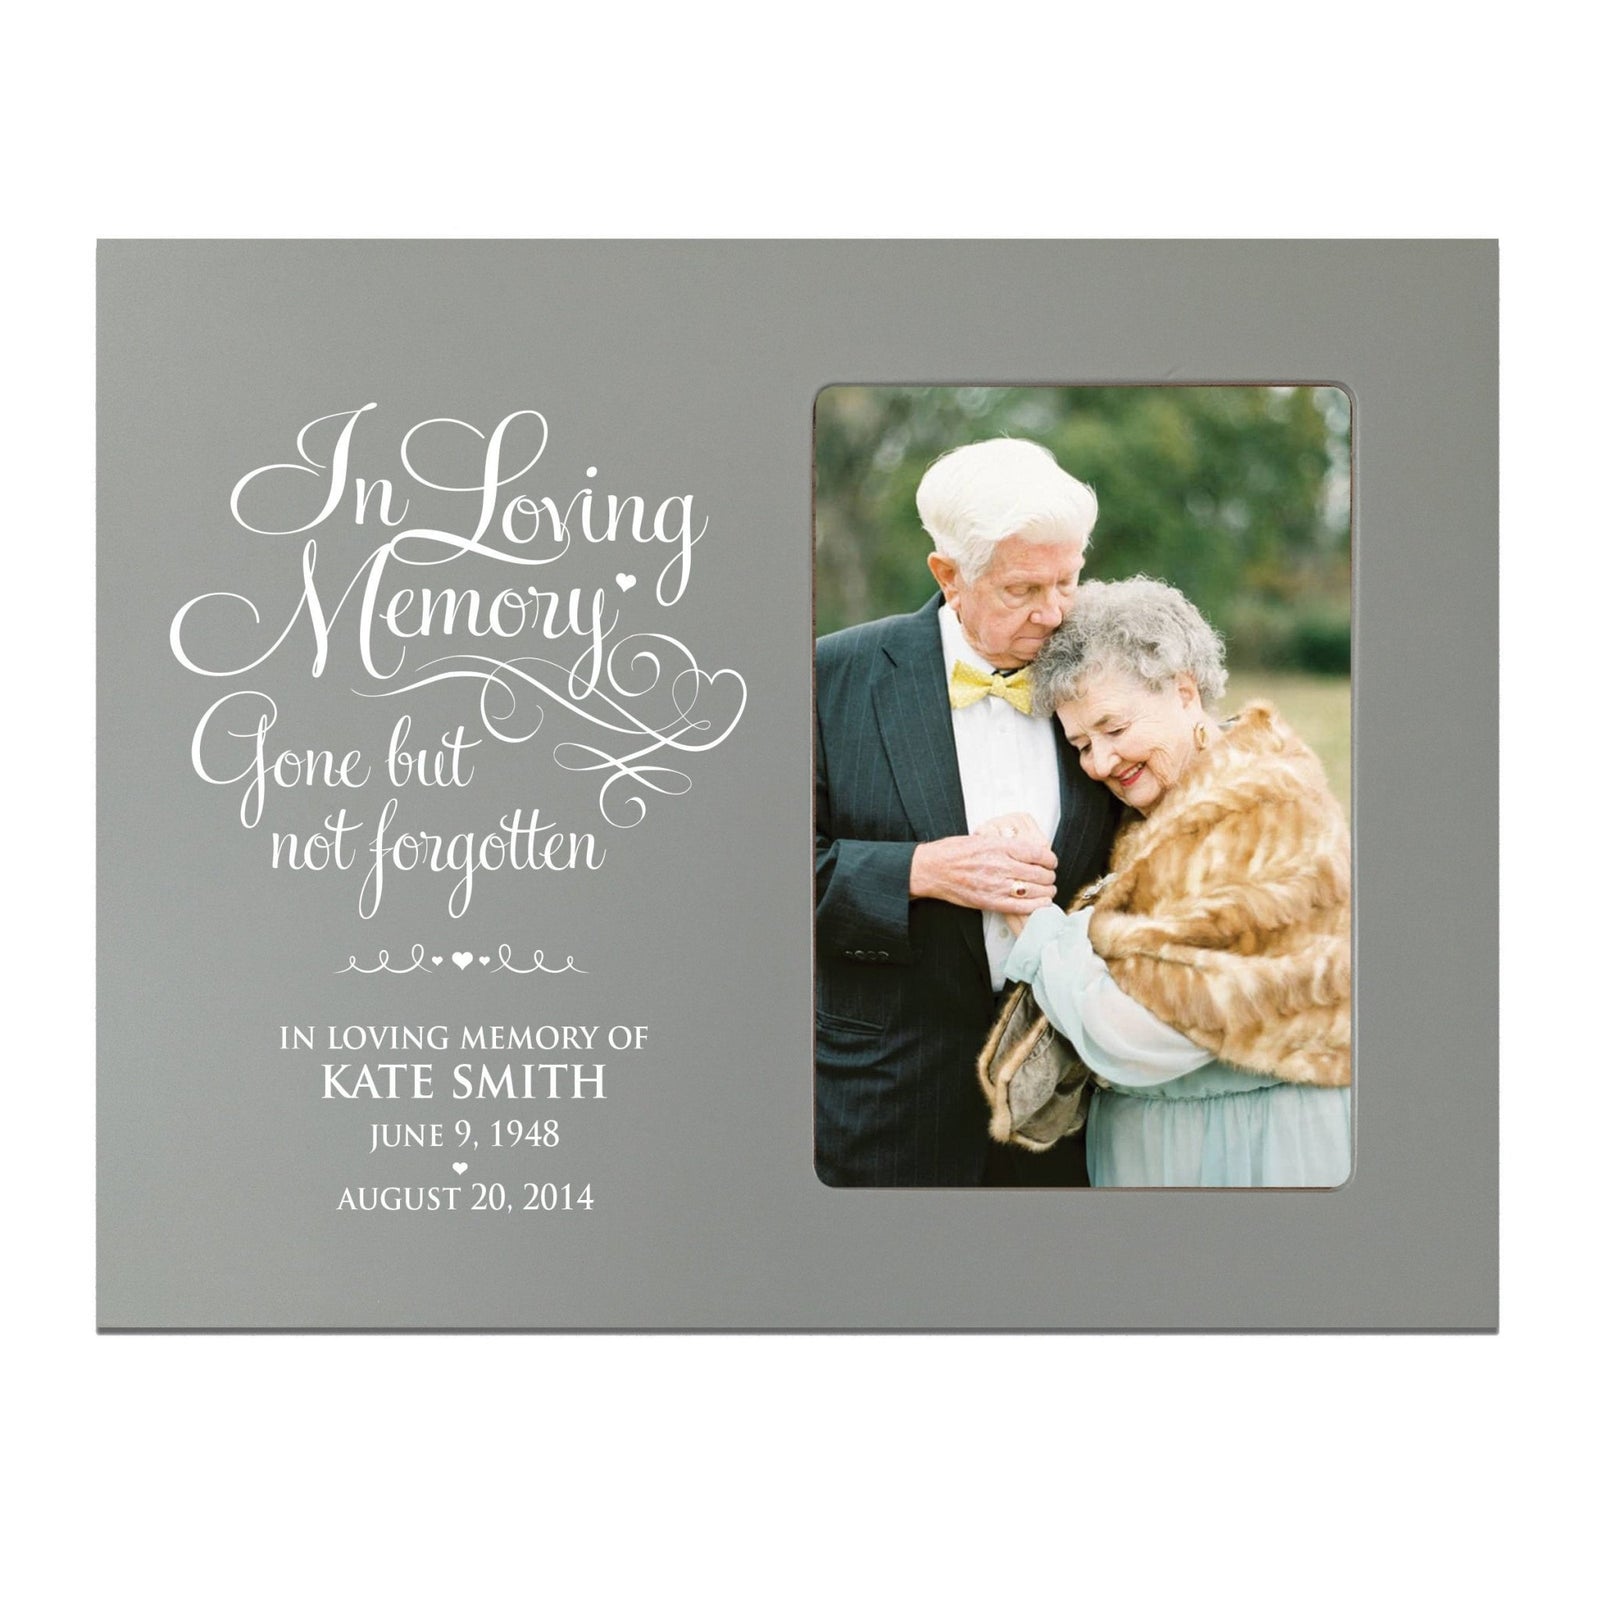 Personalized Wooden Memorial 8x10 Picture Frame holds 4x6 phot Gone But Not Forgotten - LifeSong Milestones